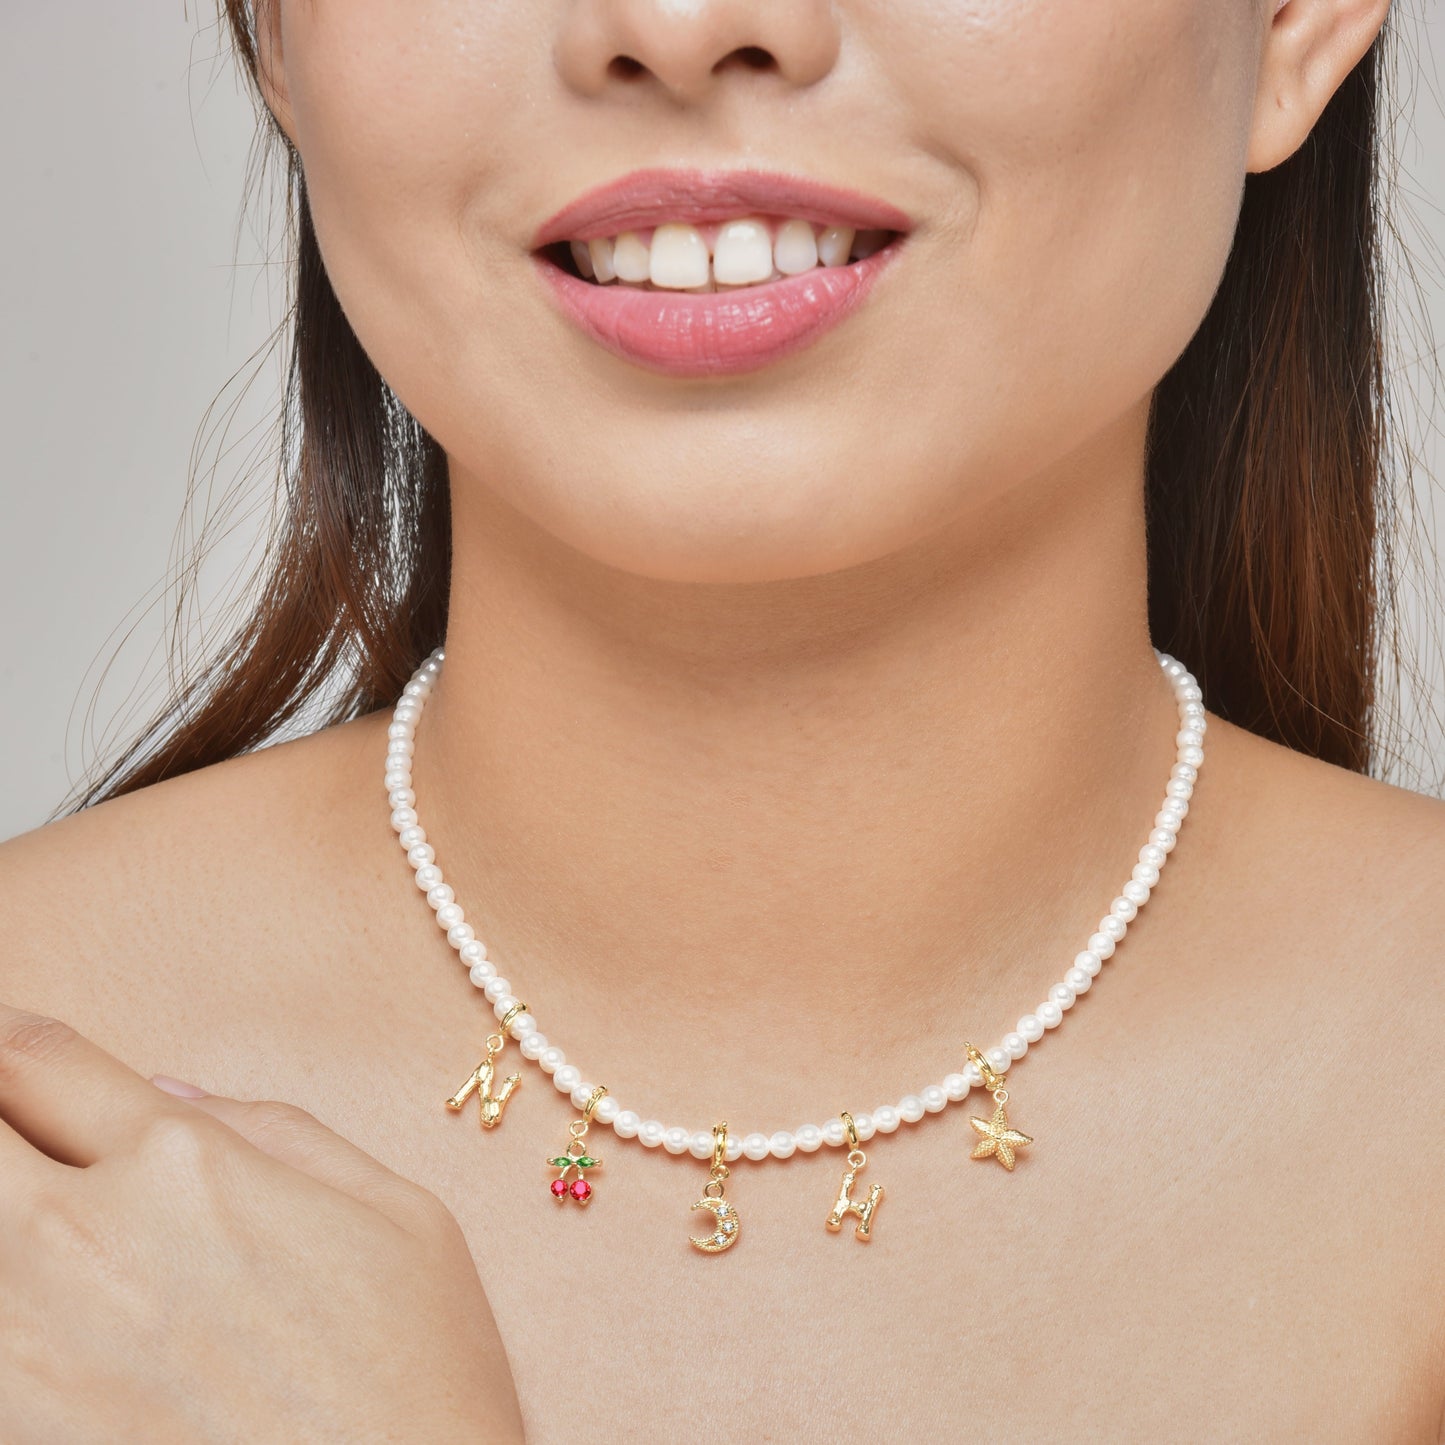 Build Your Own Charm Pearl Necklace